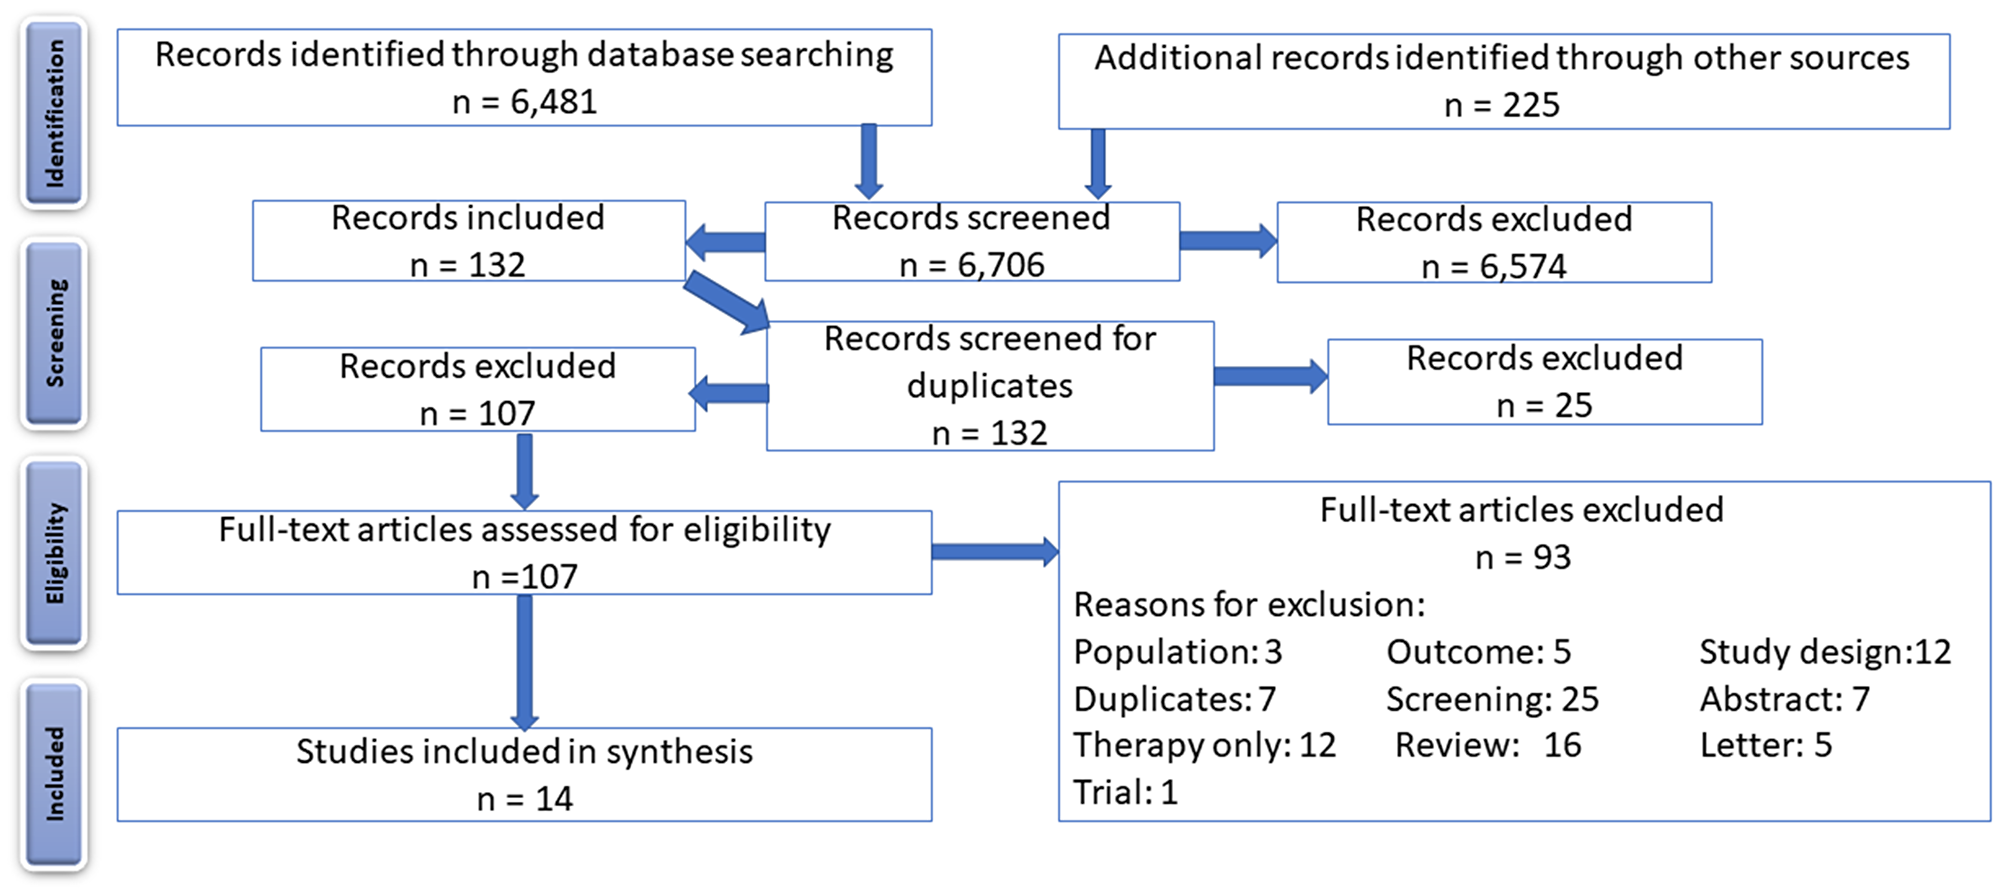 PRISMA flow diagram, showing the flow of identified records through screening, assessment for eligibility, and inclusion.